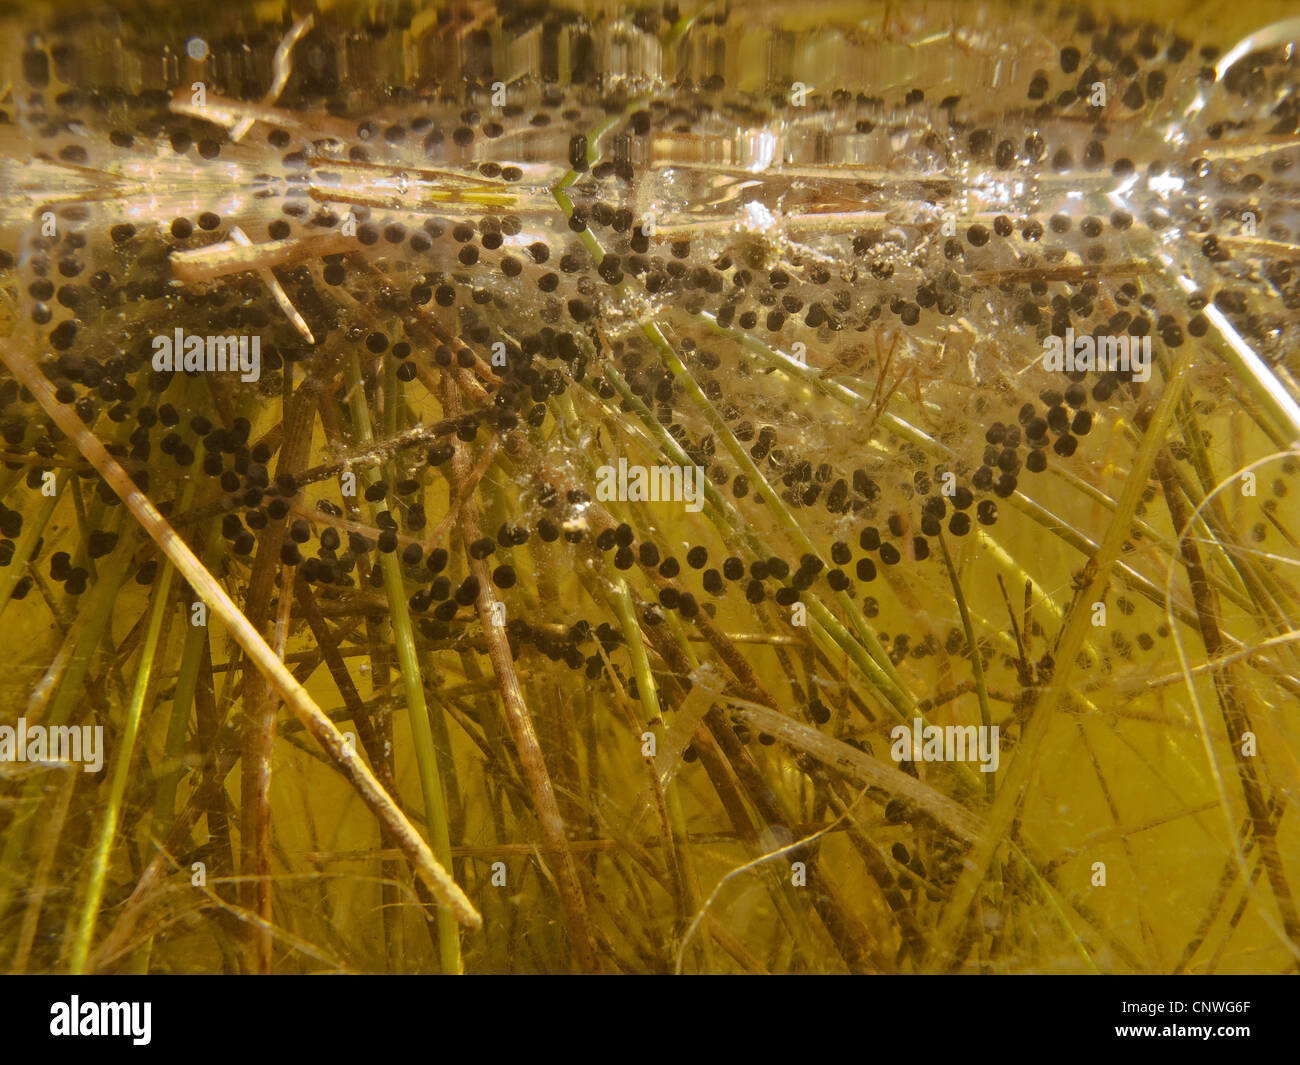 European common toad (Bufo bufo), string of spawn at rushes, Germany, Bavaria Stock Photo